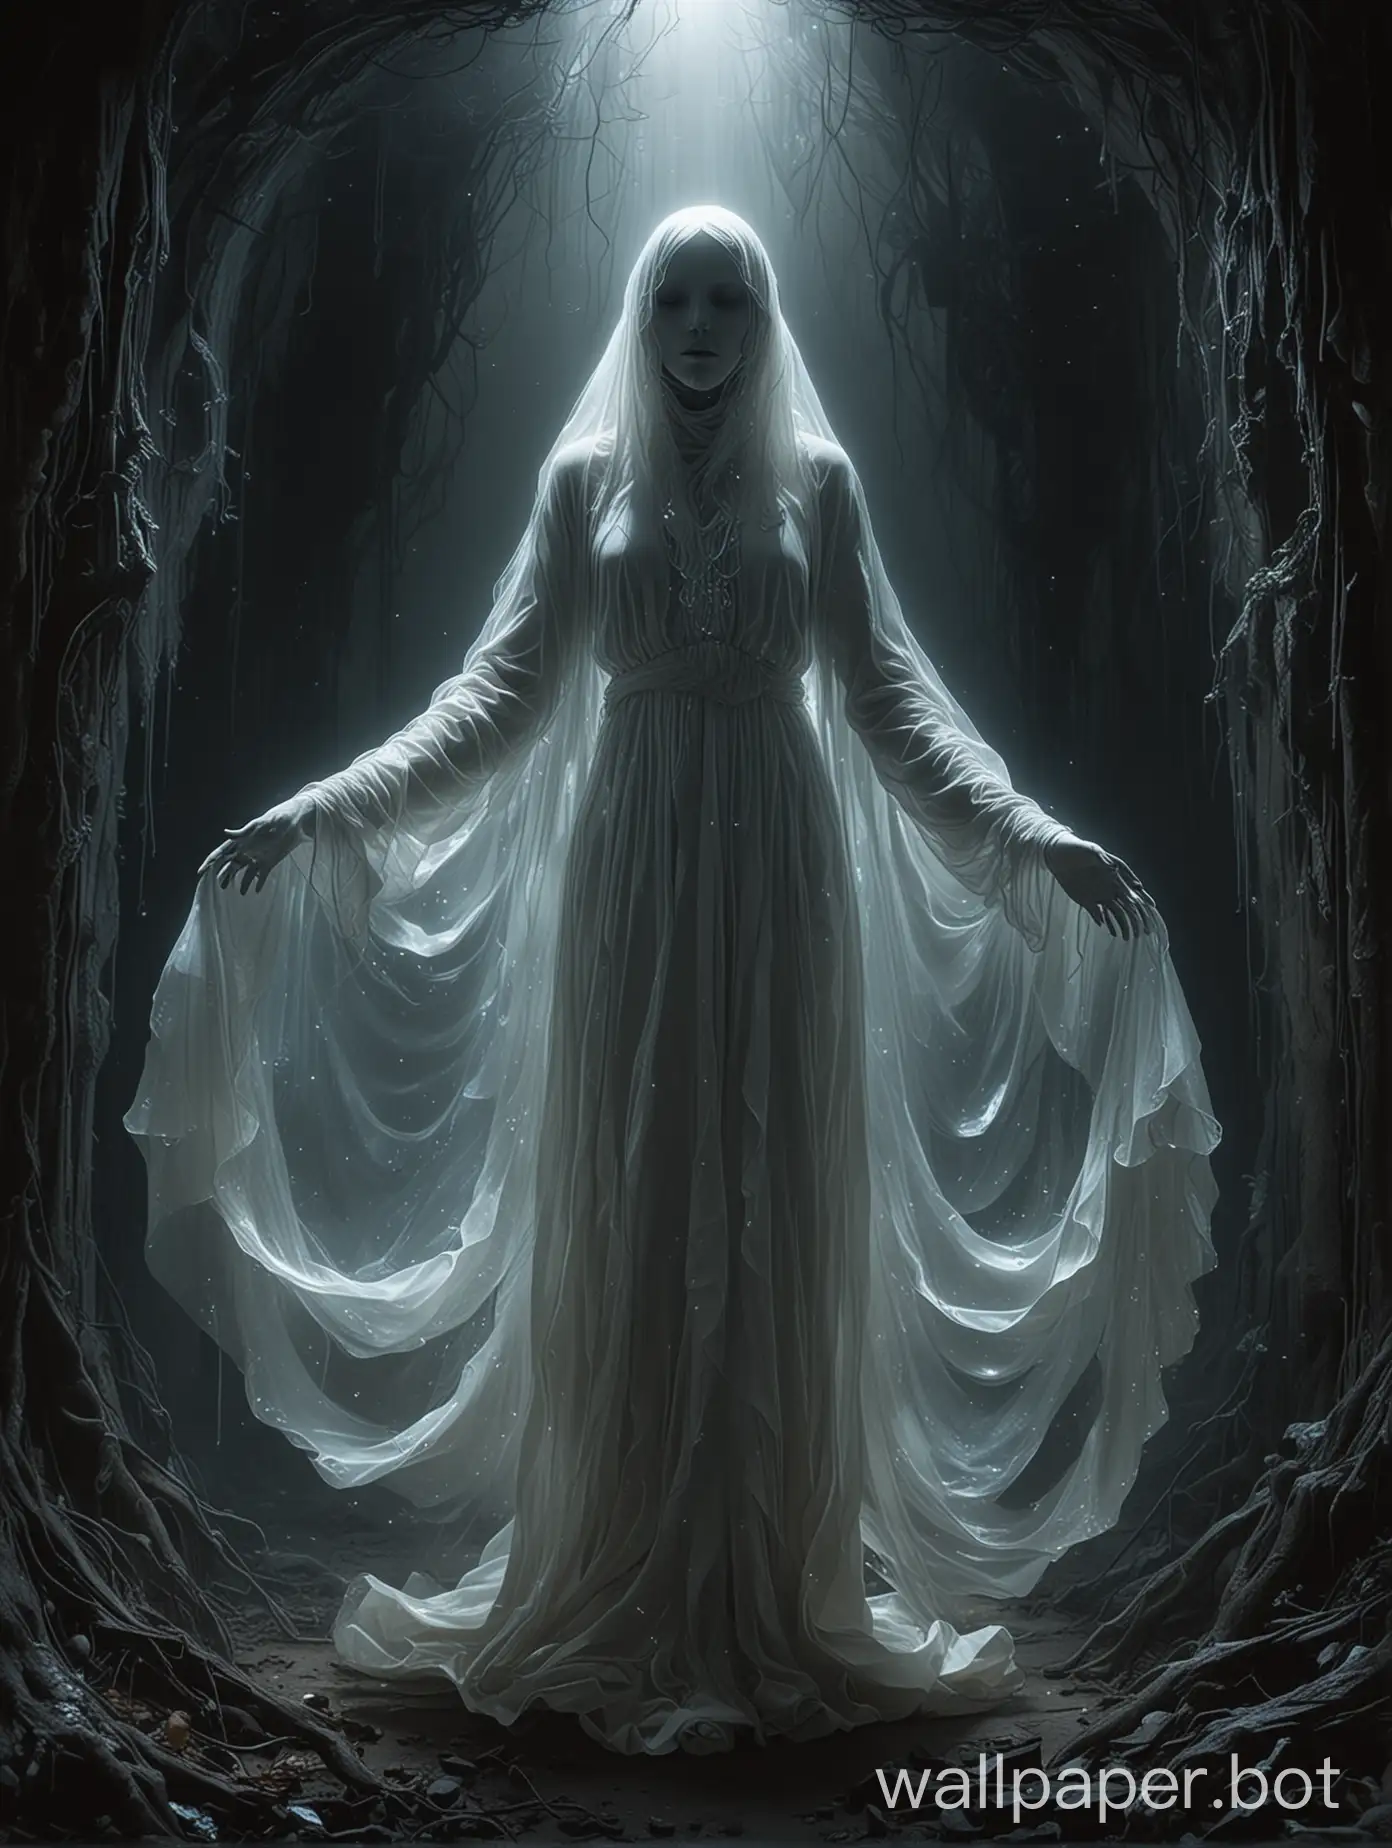 Within the confines of a hauntingly ethereal realm, a spectral being,  and endowed, hovers in the luminous abyss. This mesmerizing figure is a phantom-like being composed of shapes and shades that defy definition, their form shifting and undulating in a never-ending dance of light and shadow. The image is a hyper-realistic digital painting, meticulously rendered with startling detail and depth. Every pixel seems to pulsate with an otherworldly energy, drawing viewers into a trance-like state as they contemplate the enigmatic presence before them. This ghostly apparition is a masterful blend of artistry and mystique, a true testament to the power of imagination and creativity in the world of virtual art.